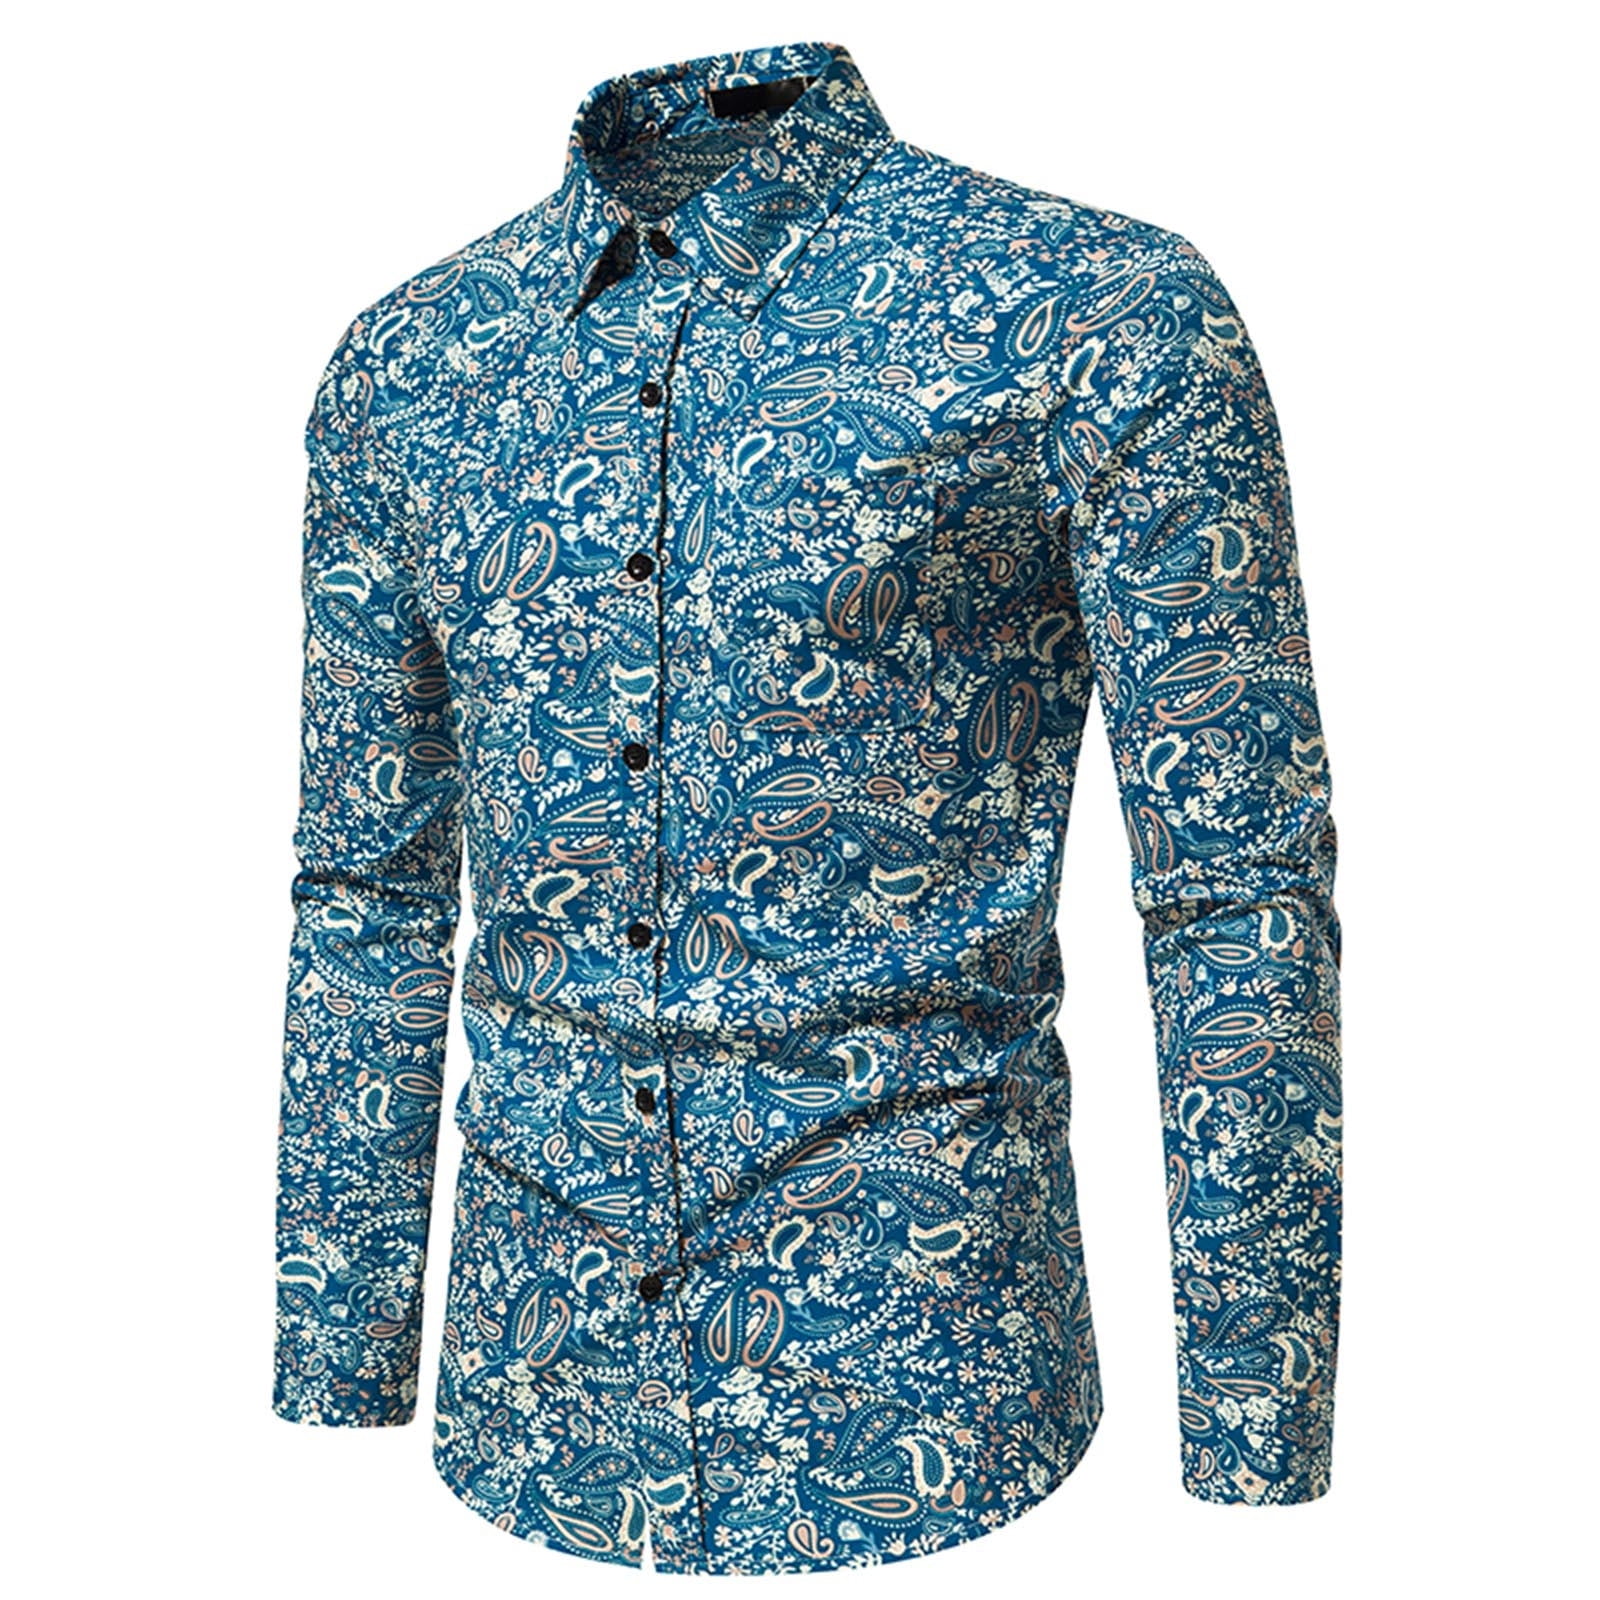 ZCFZJW Mens Paisley Printed Shirts Casual Long Sleeve Button Down 